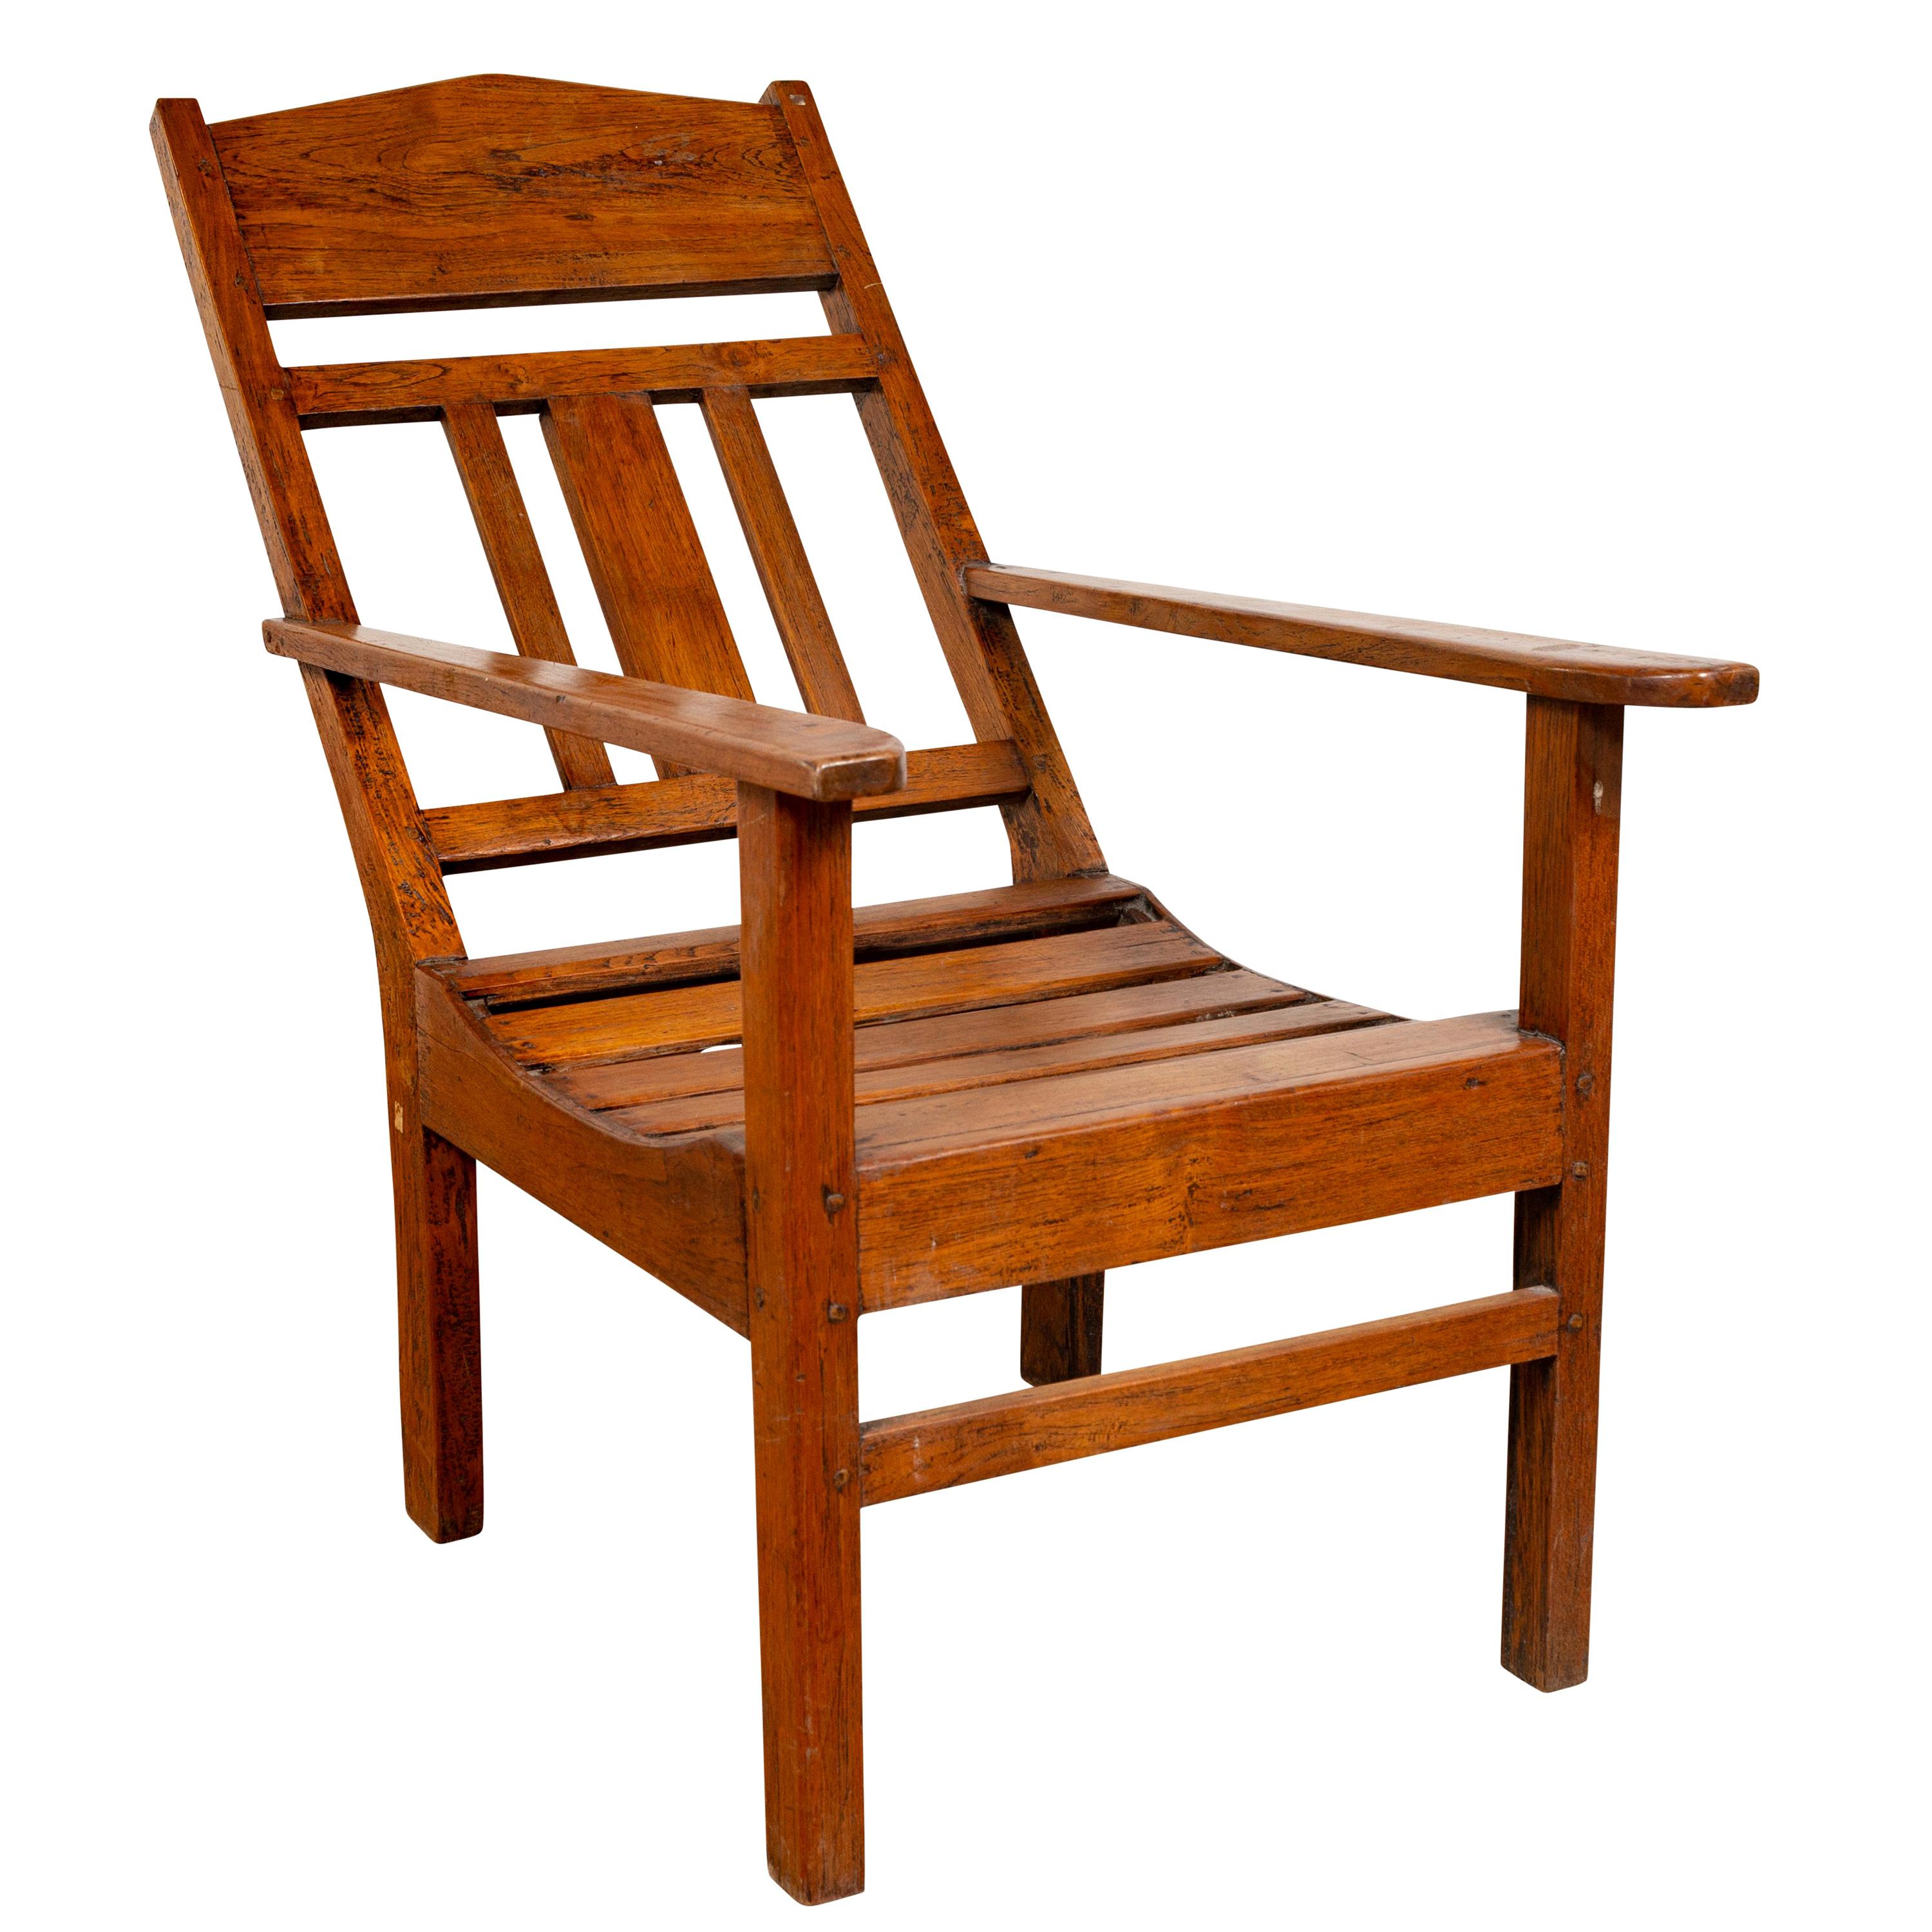 Javanese Vintage Dutch Colonial Plantation Wooden Lounge Chair with Slanted Back For Sale